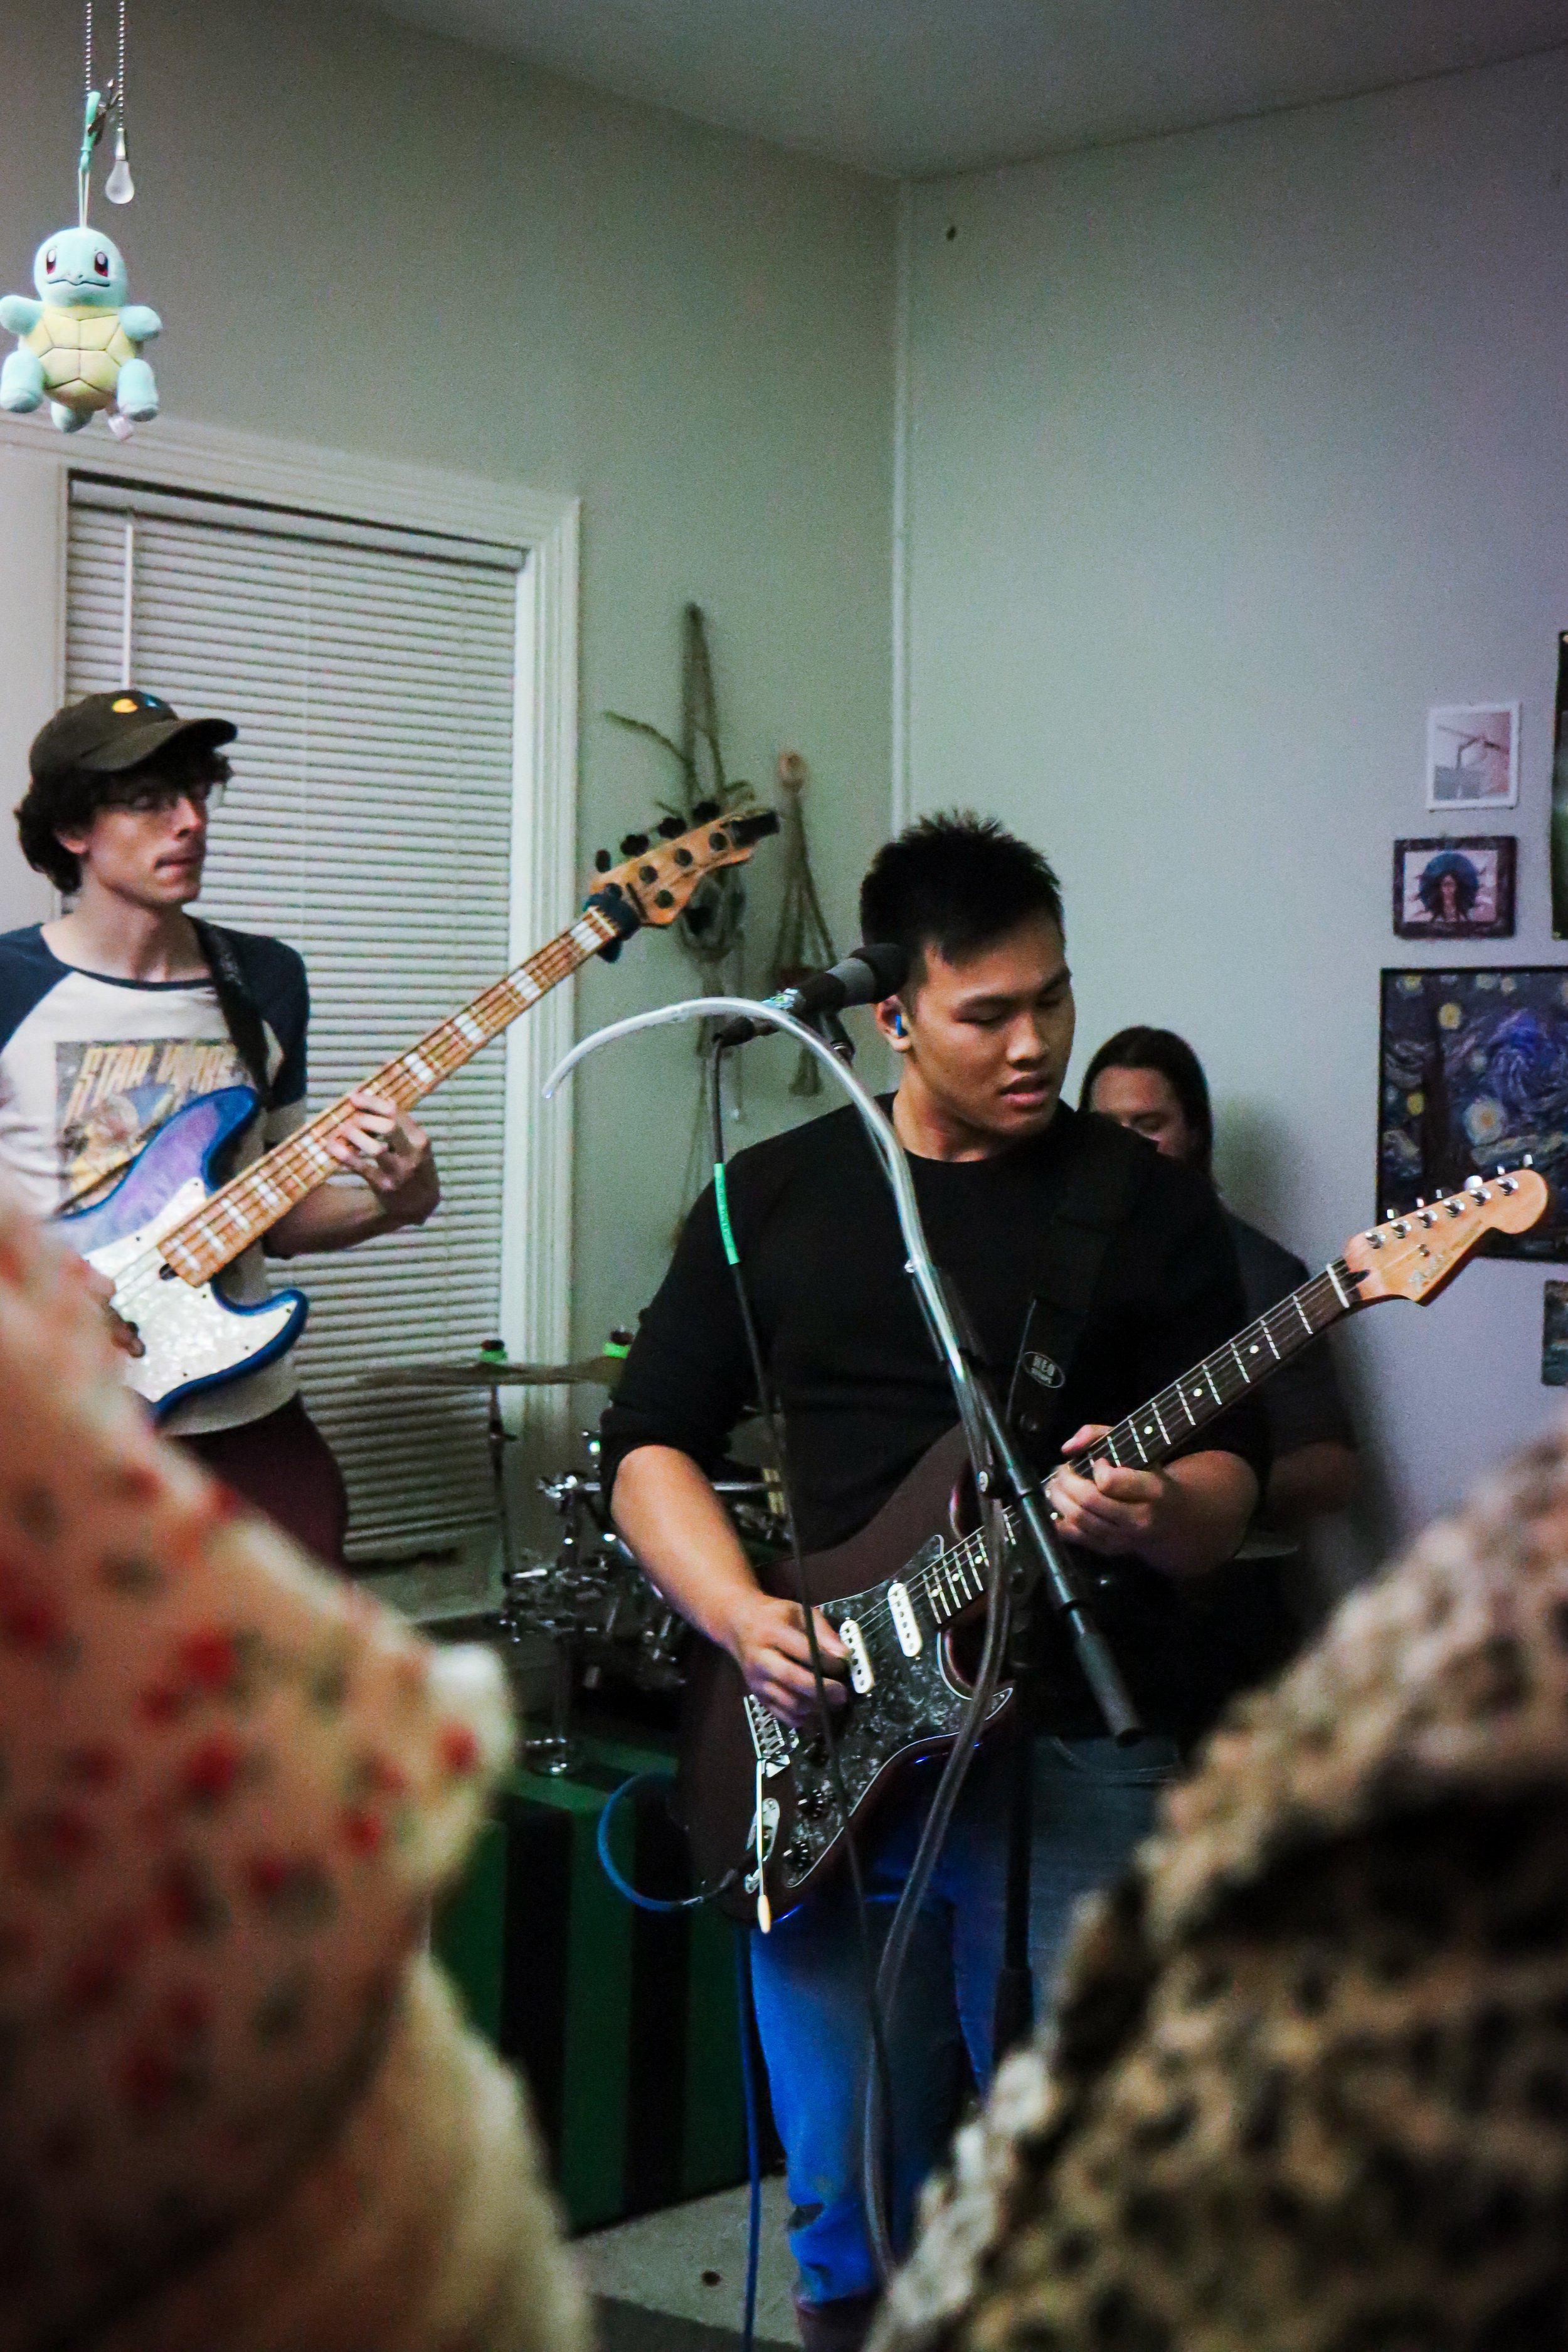  Blue Tongue performs its set at the Afterglow House Show.  Photo by Natalie Anspach  